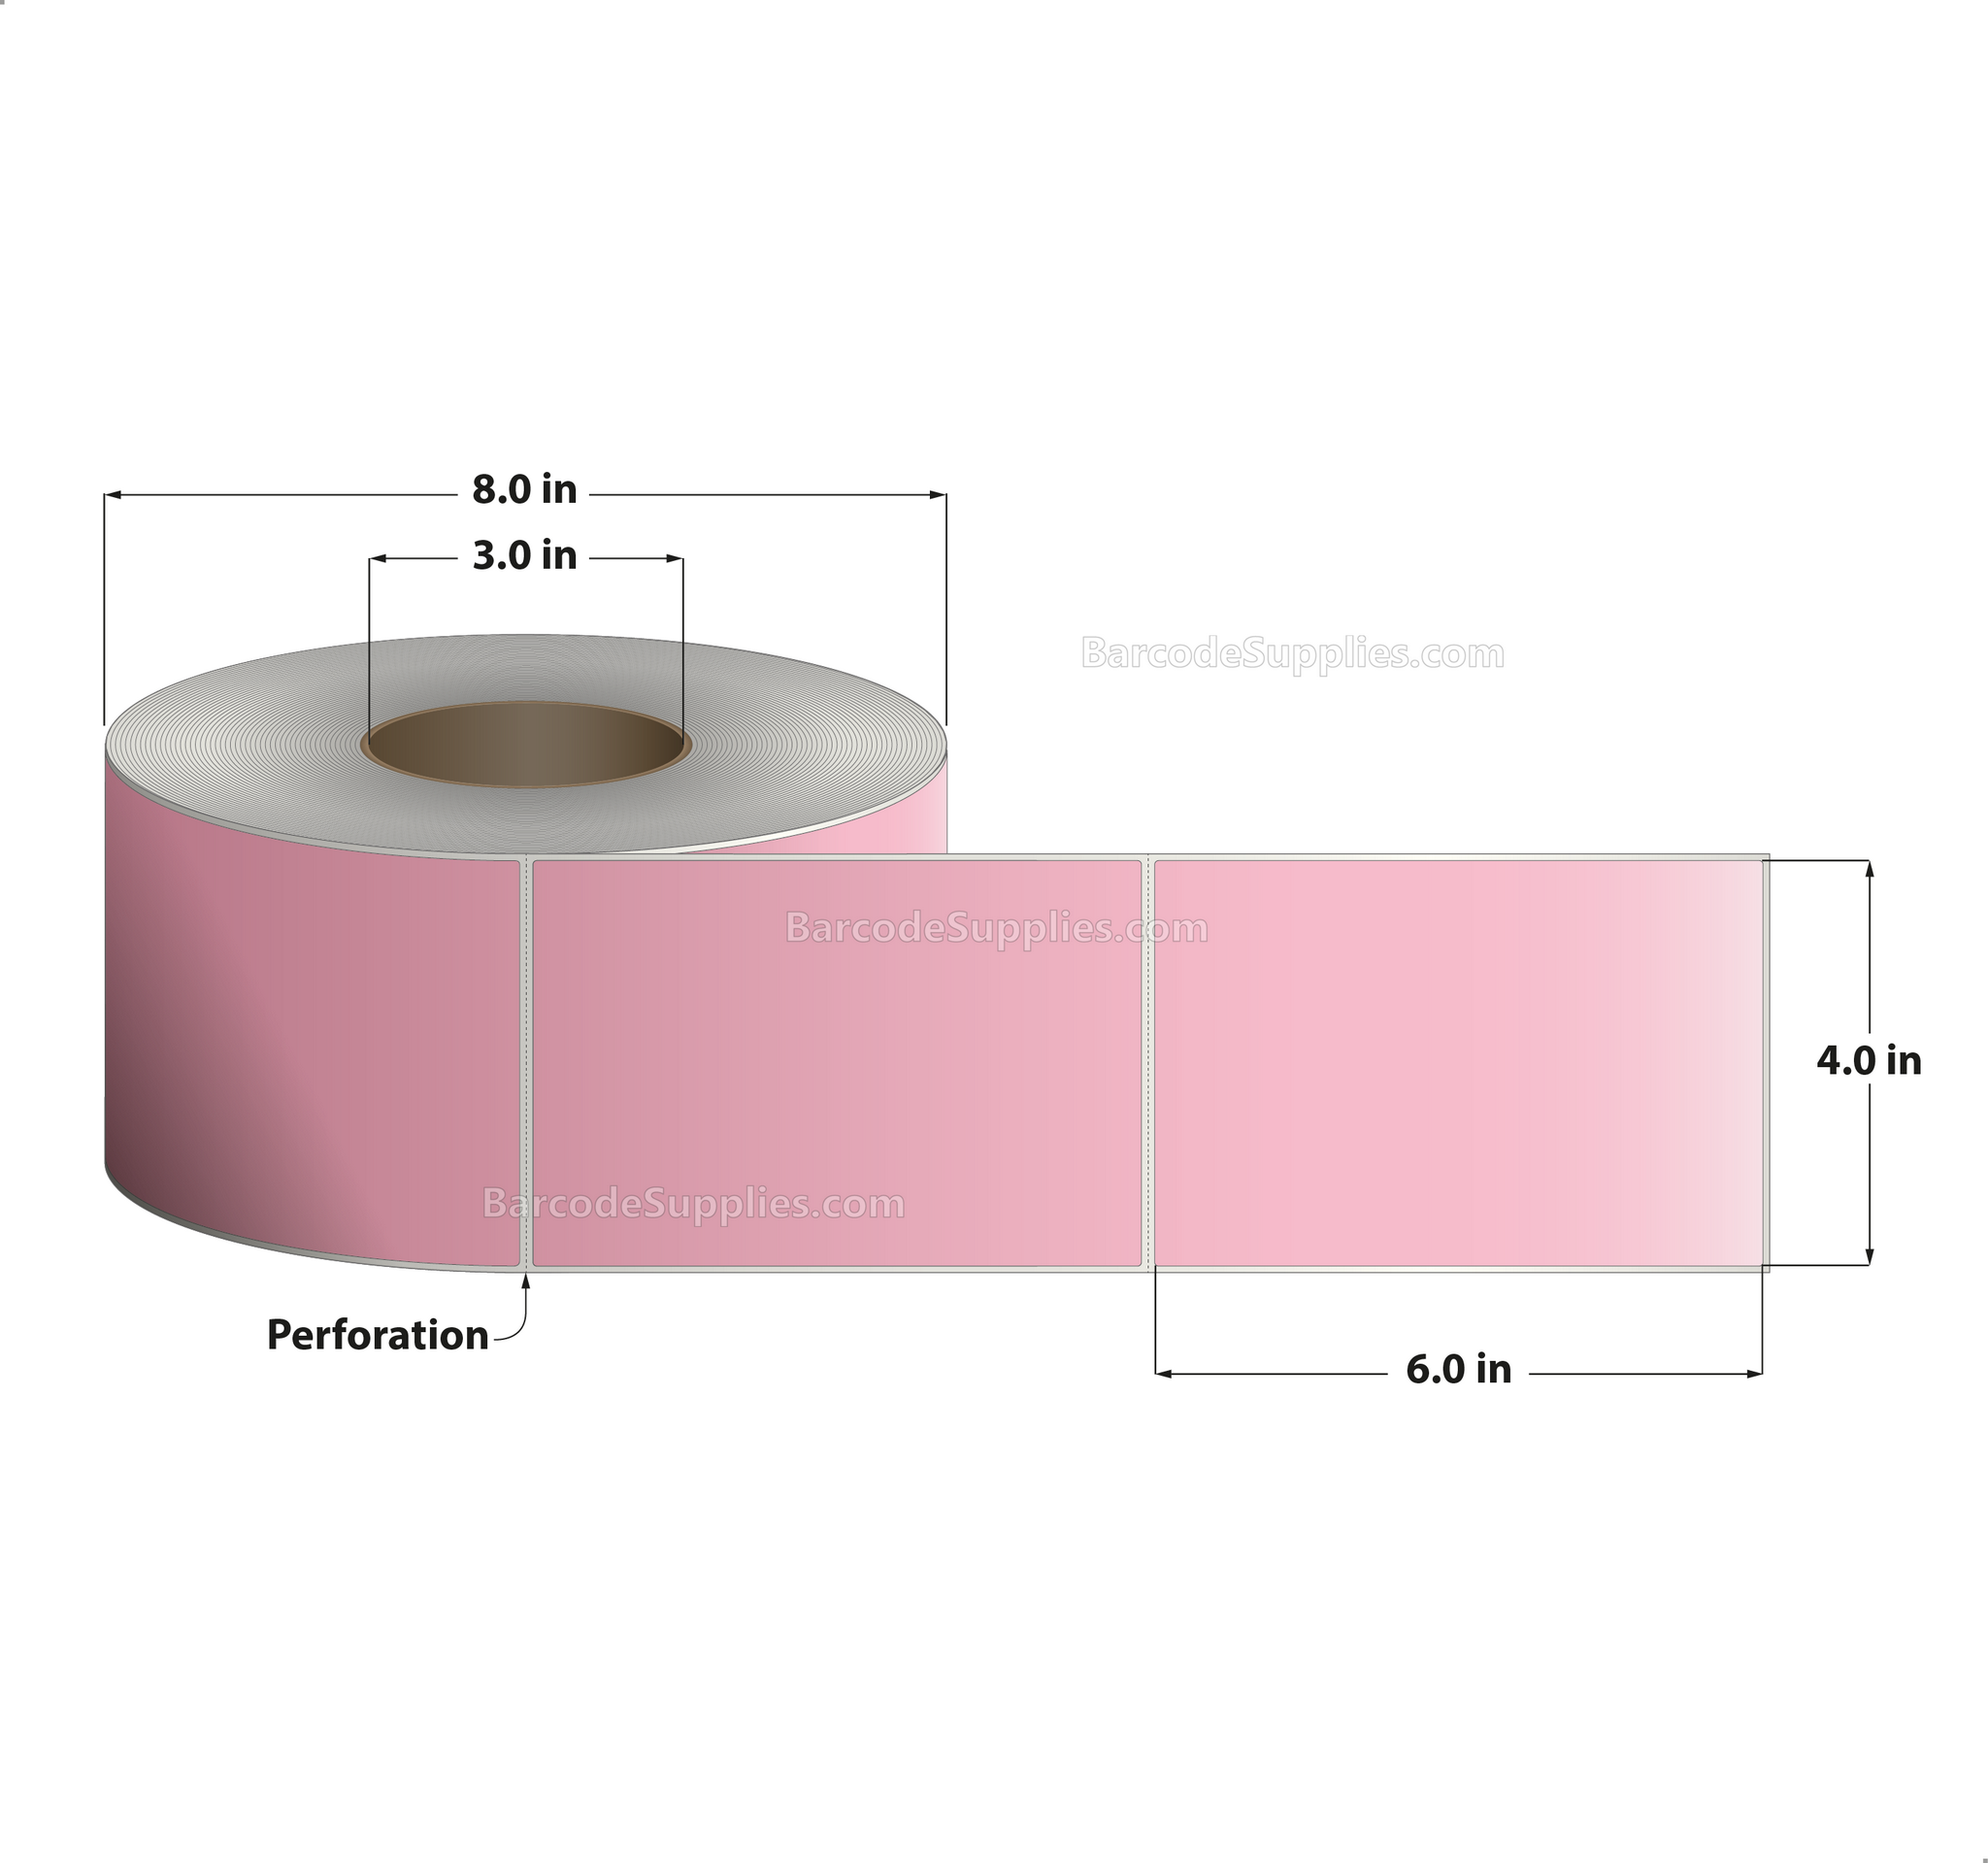 4 x 6 Thermal Transfer 176 Pink Labels With Permanent Adhesive - Perforated - 1000 Labels Per Roll - Carton Of 4 Rolls - 4000 Labels Total - MPN: RFC-4-6-1000-PK